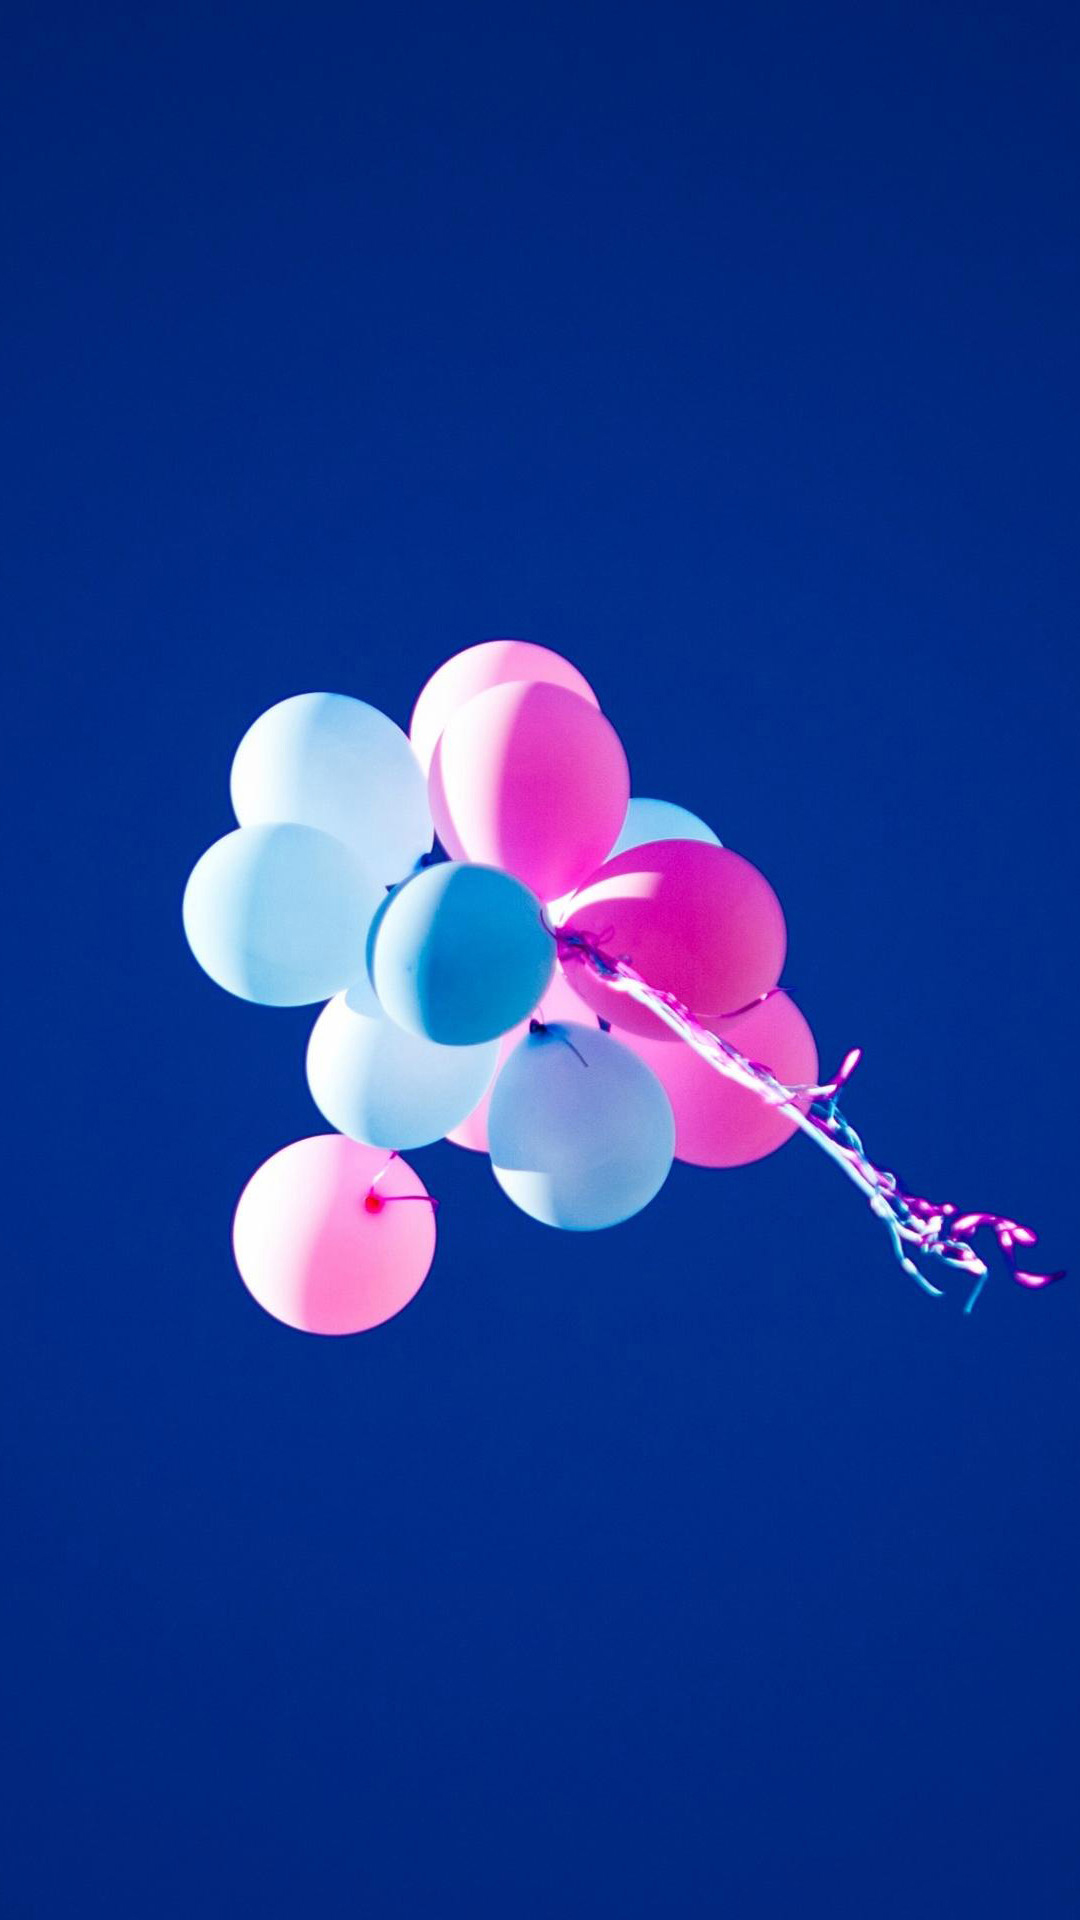 HD Balloons Blue Sky Pink Android Wallpaper free download